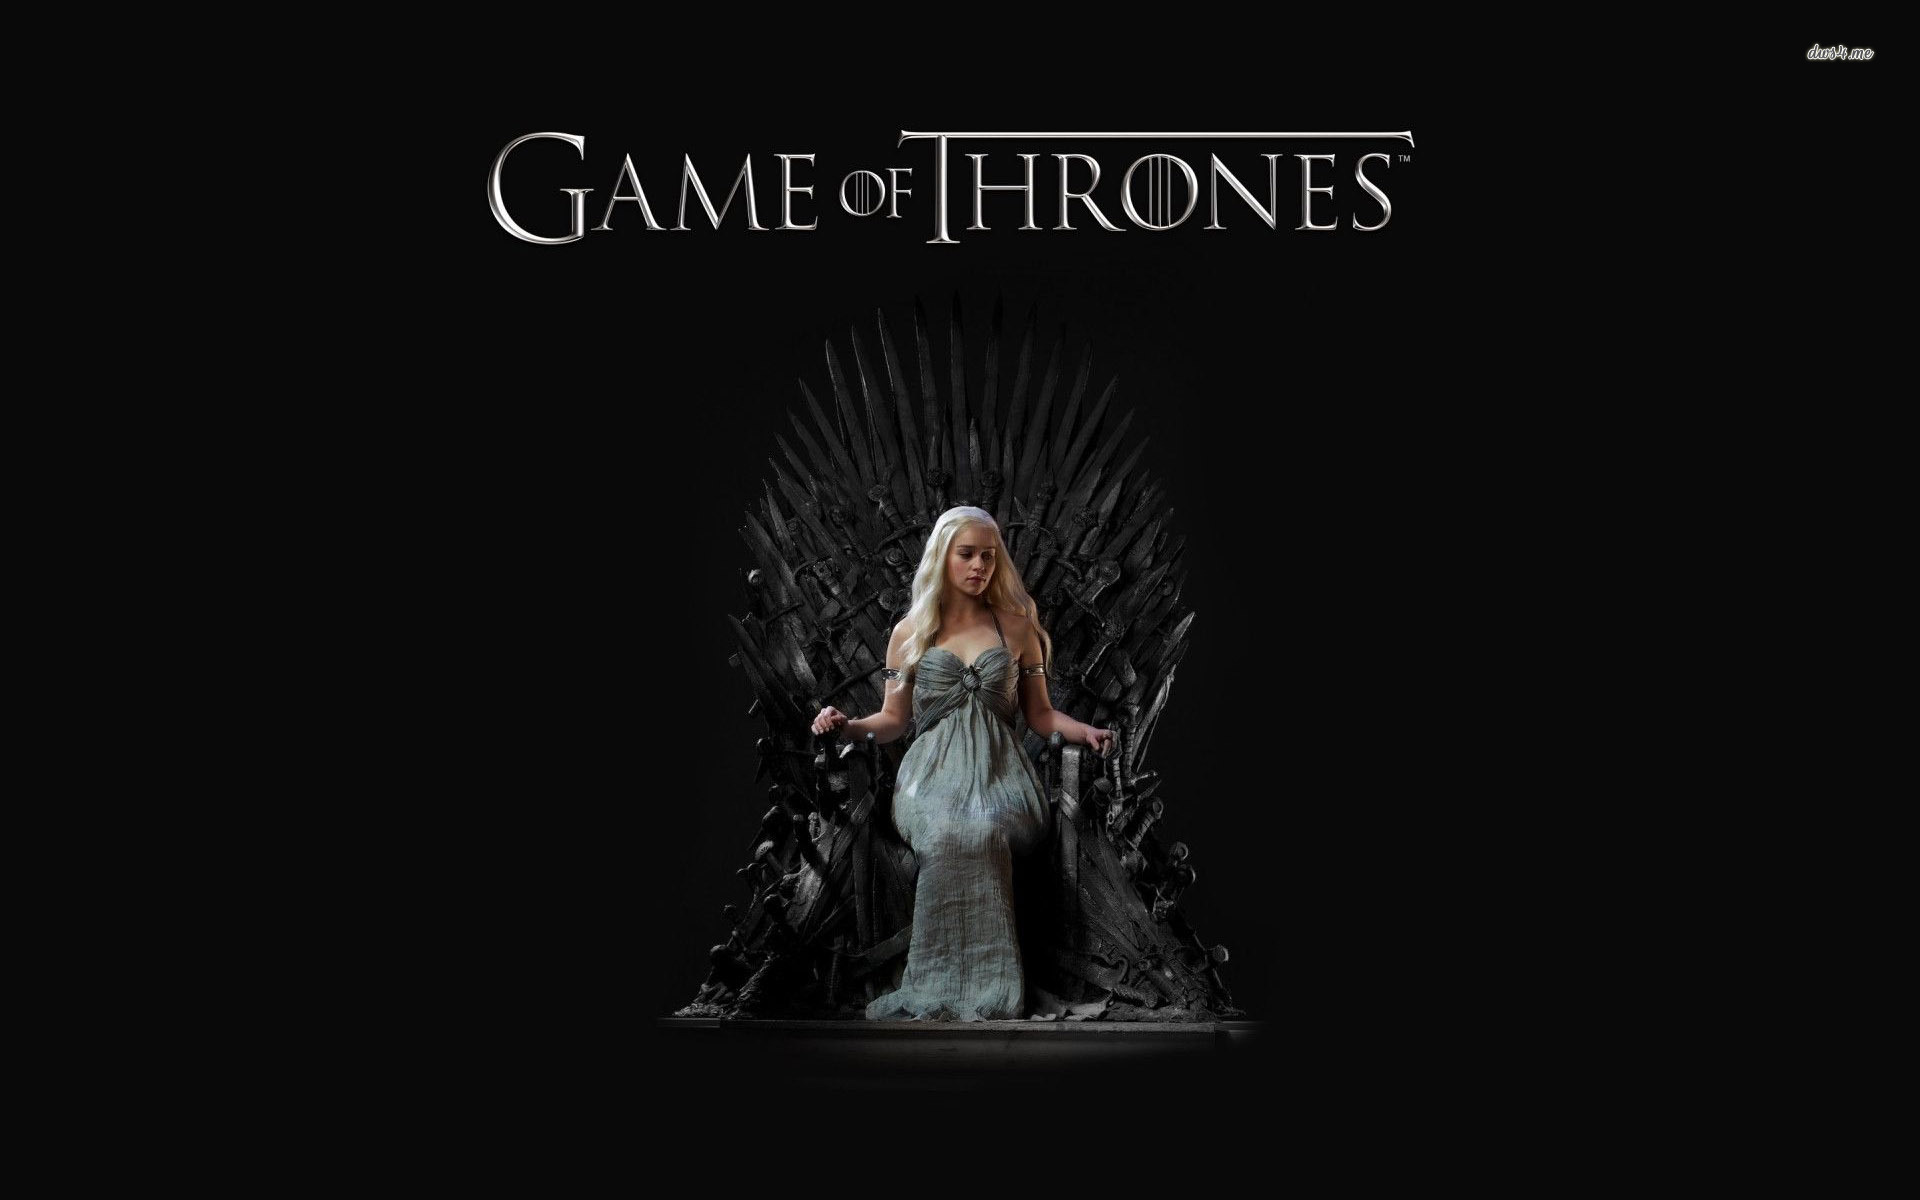 High Quality HD Game of Thrones wallpapers 95478 is free HD wallpaper